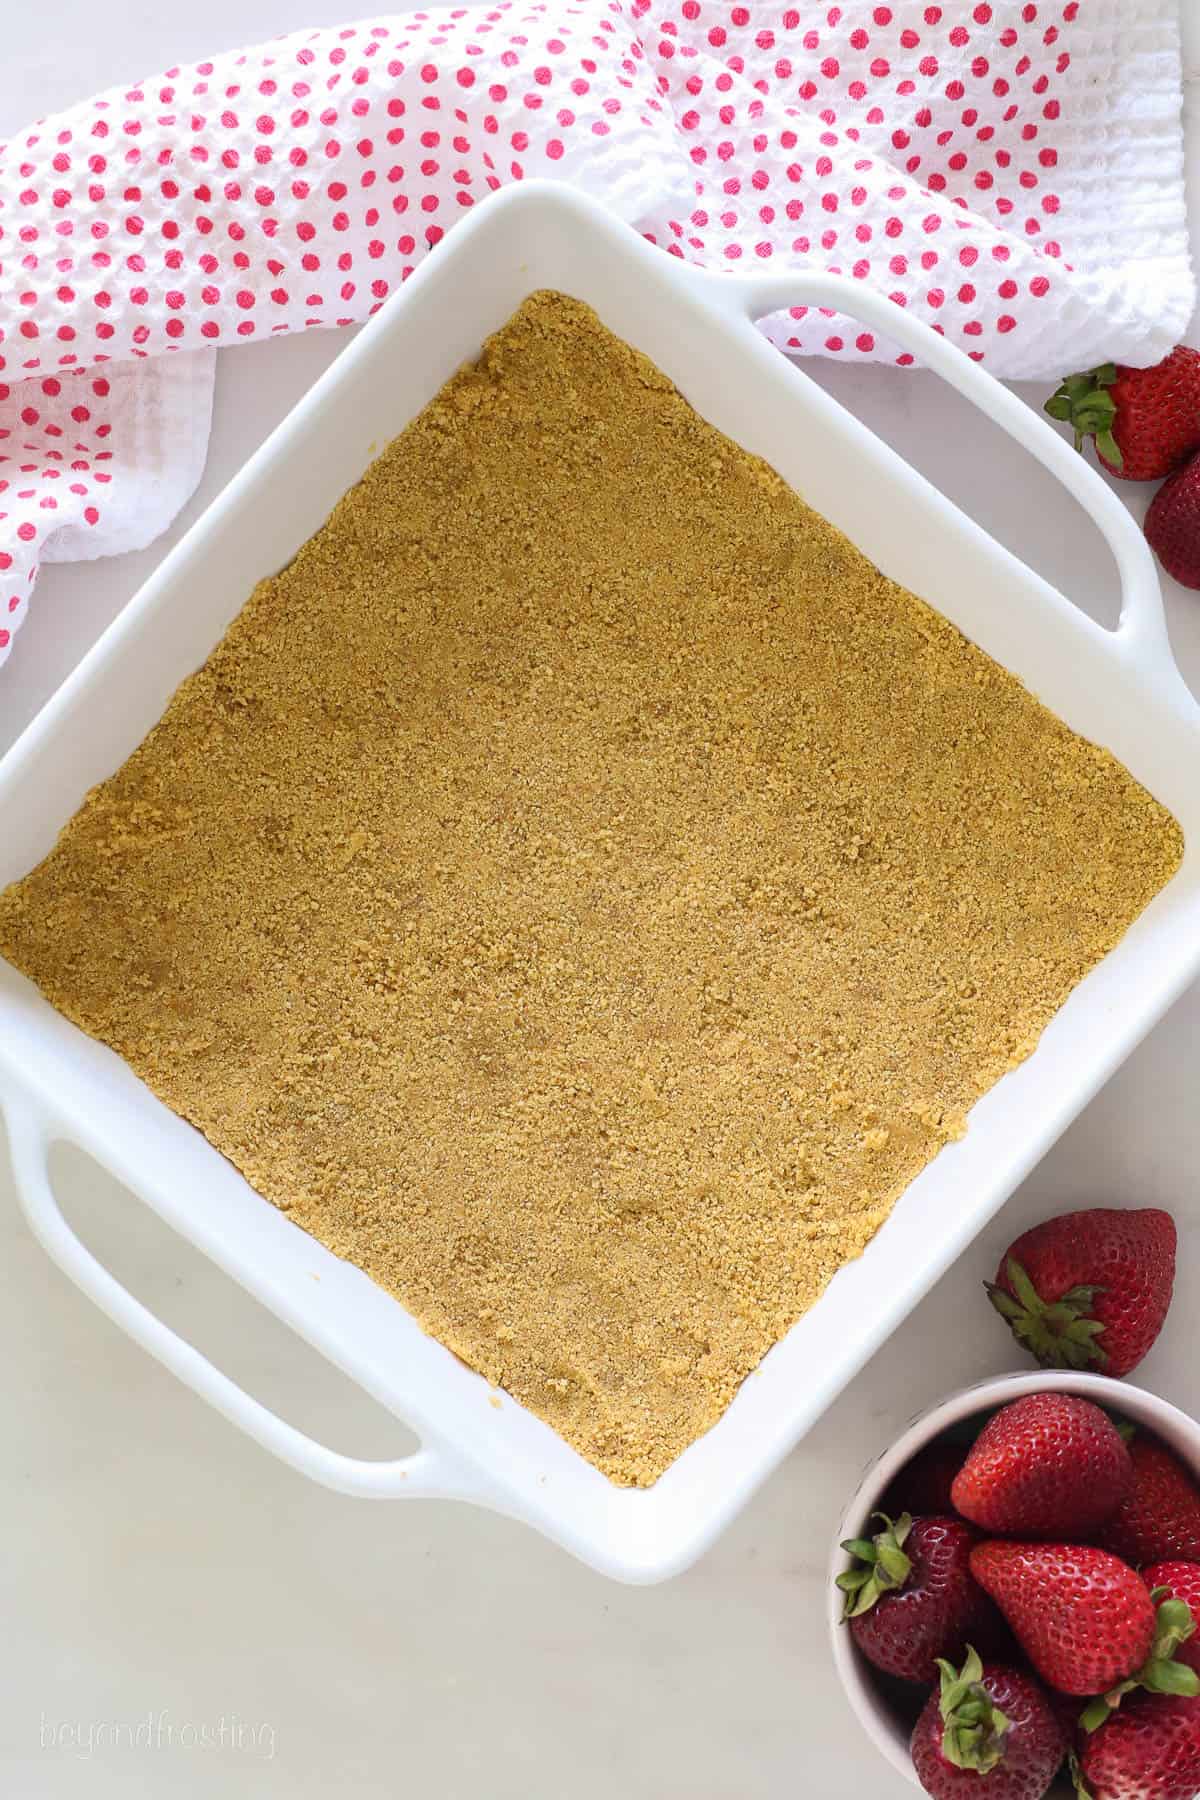 graham cracker crumbs pressed into a white casserole dish